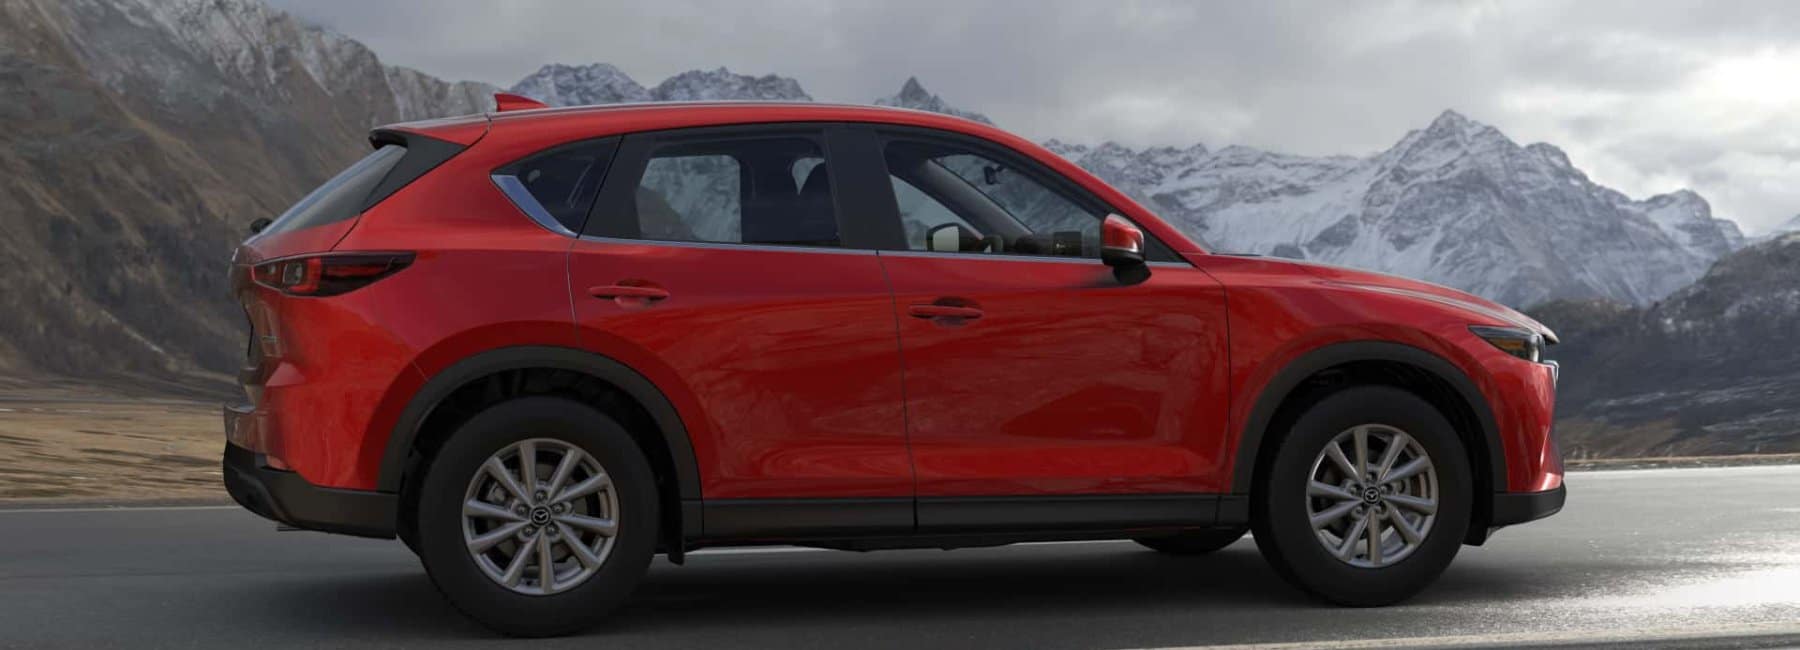 2022 mazda-cx5-sideview-mountain range-background-red